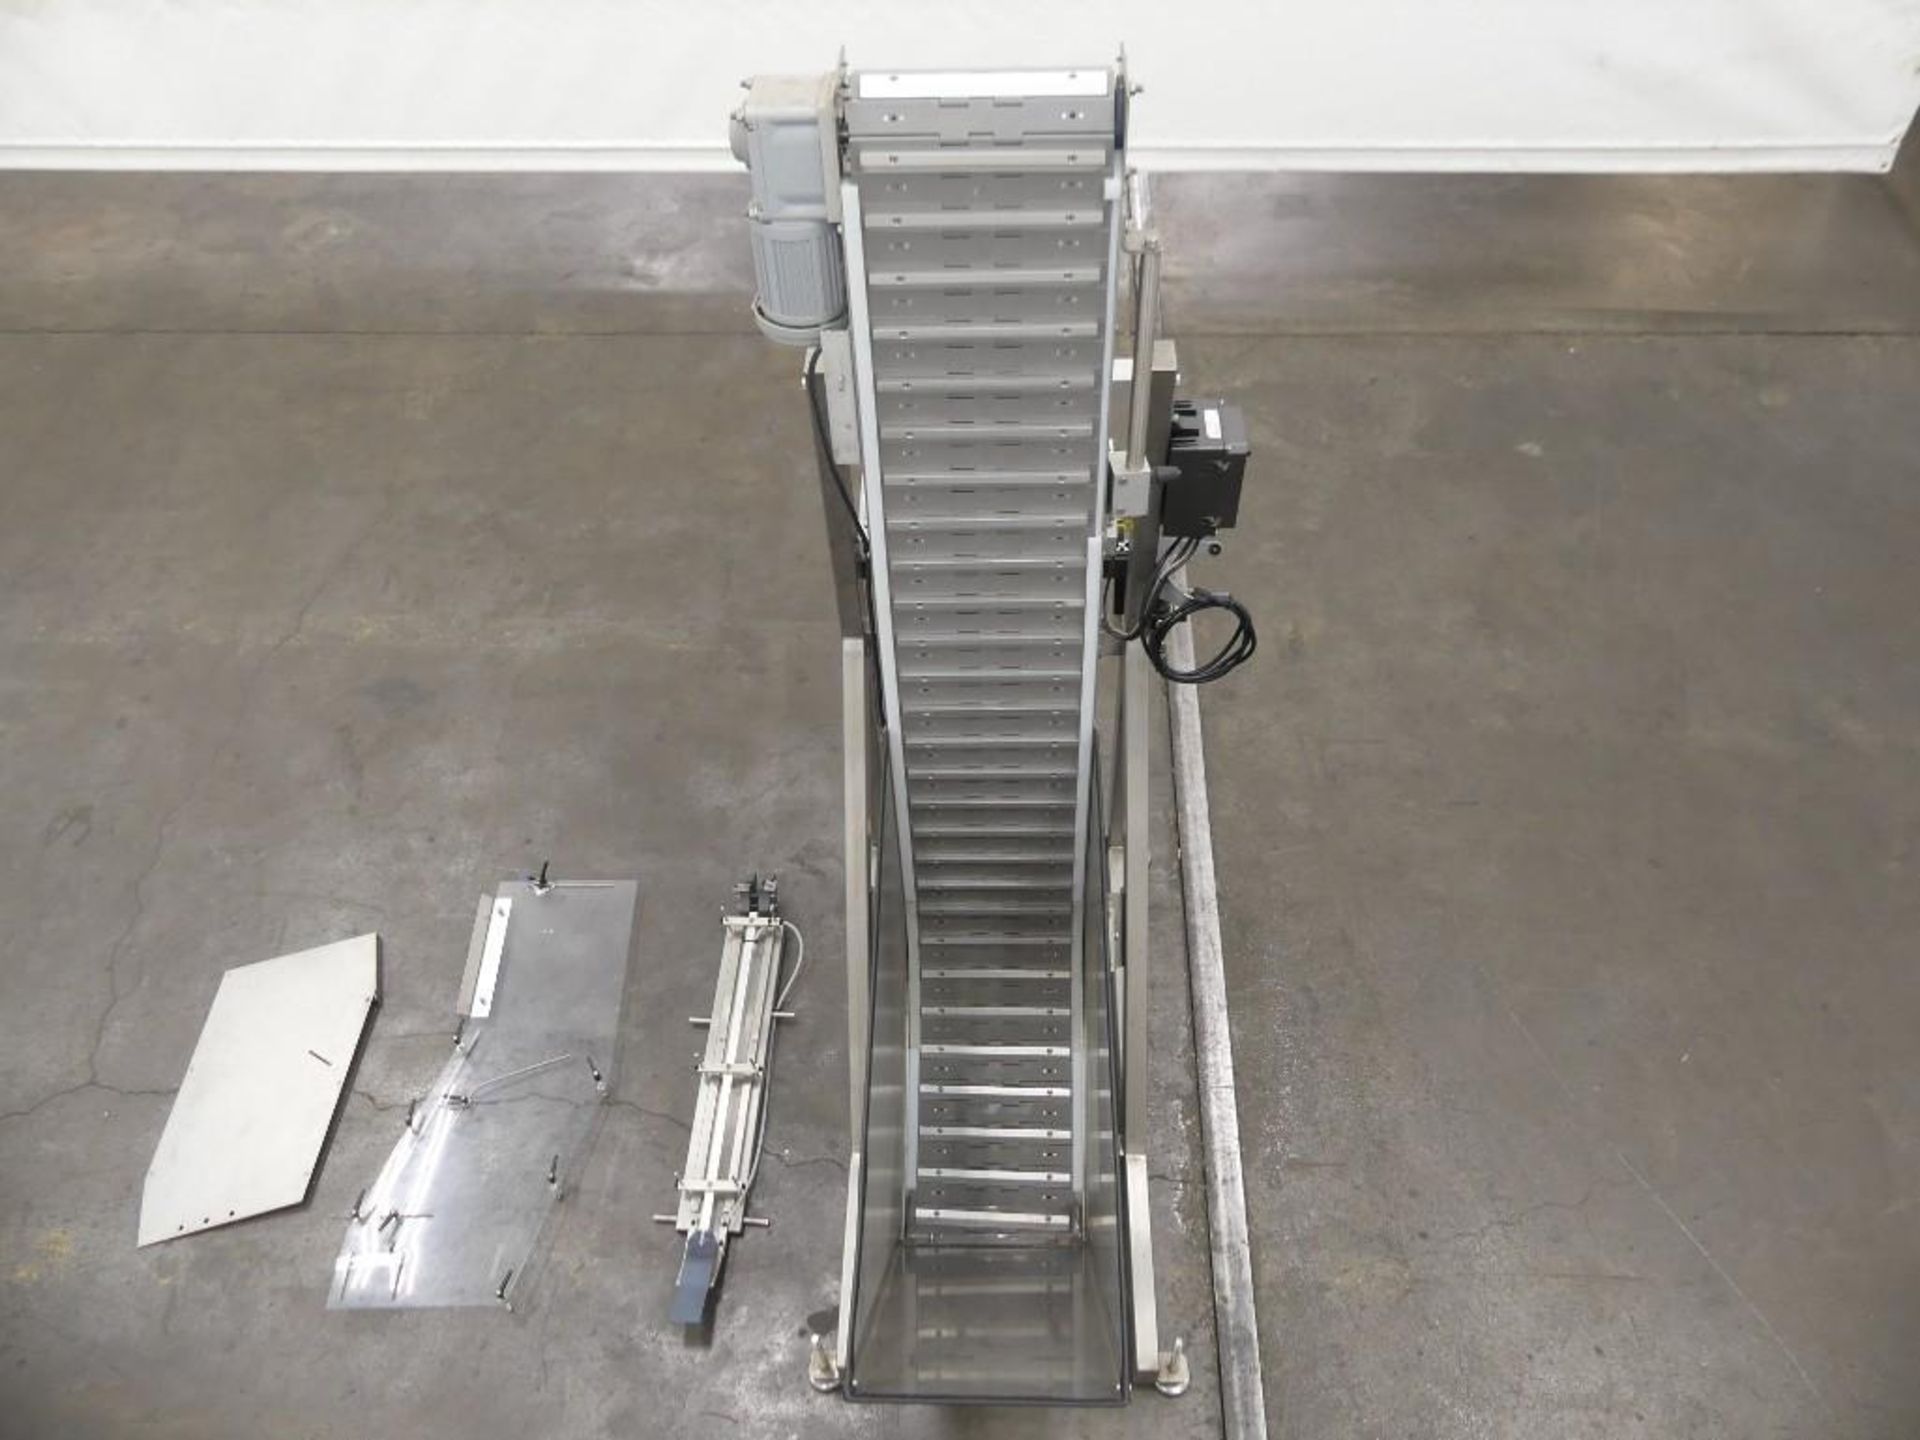 2019 AccuTek Packaging Equipment Co. 50-C0E-CH2 Stainless Steel Cap Loader Elevator - Image 6 of 25